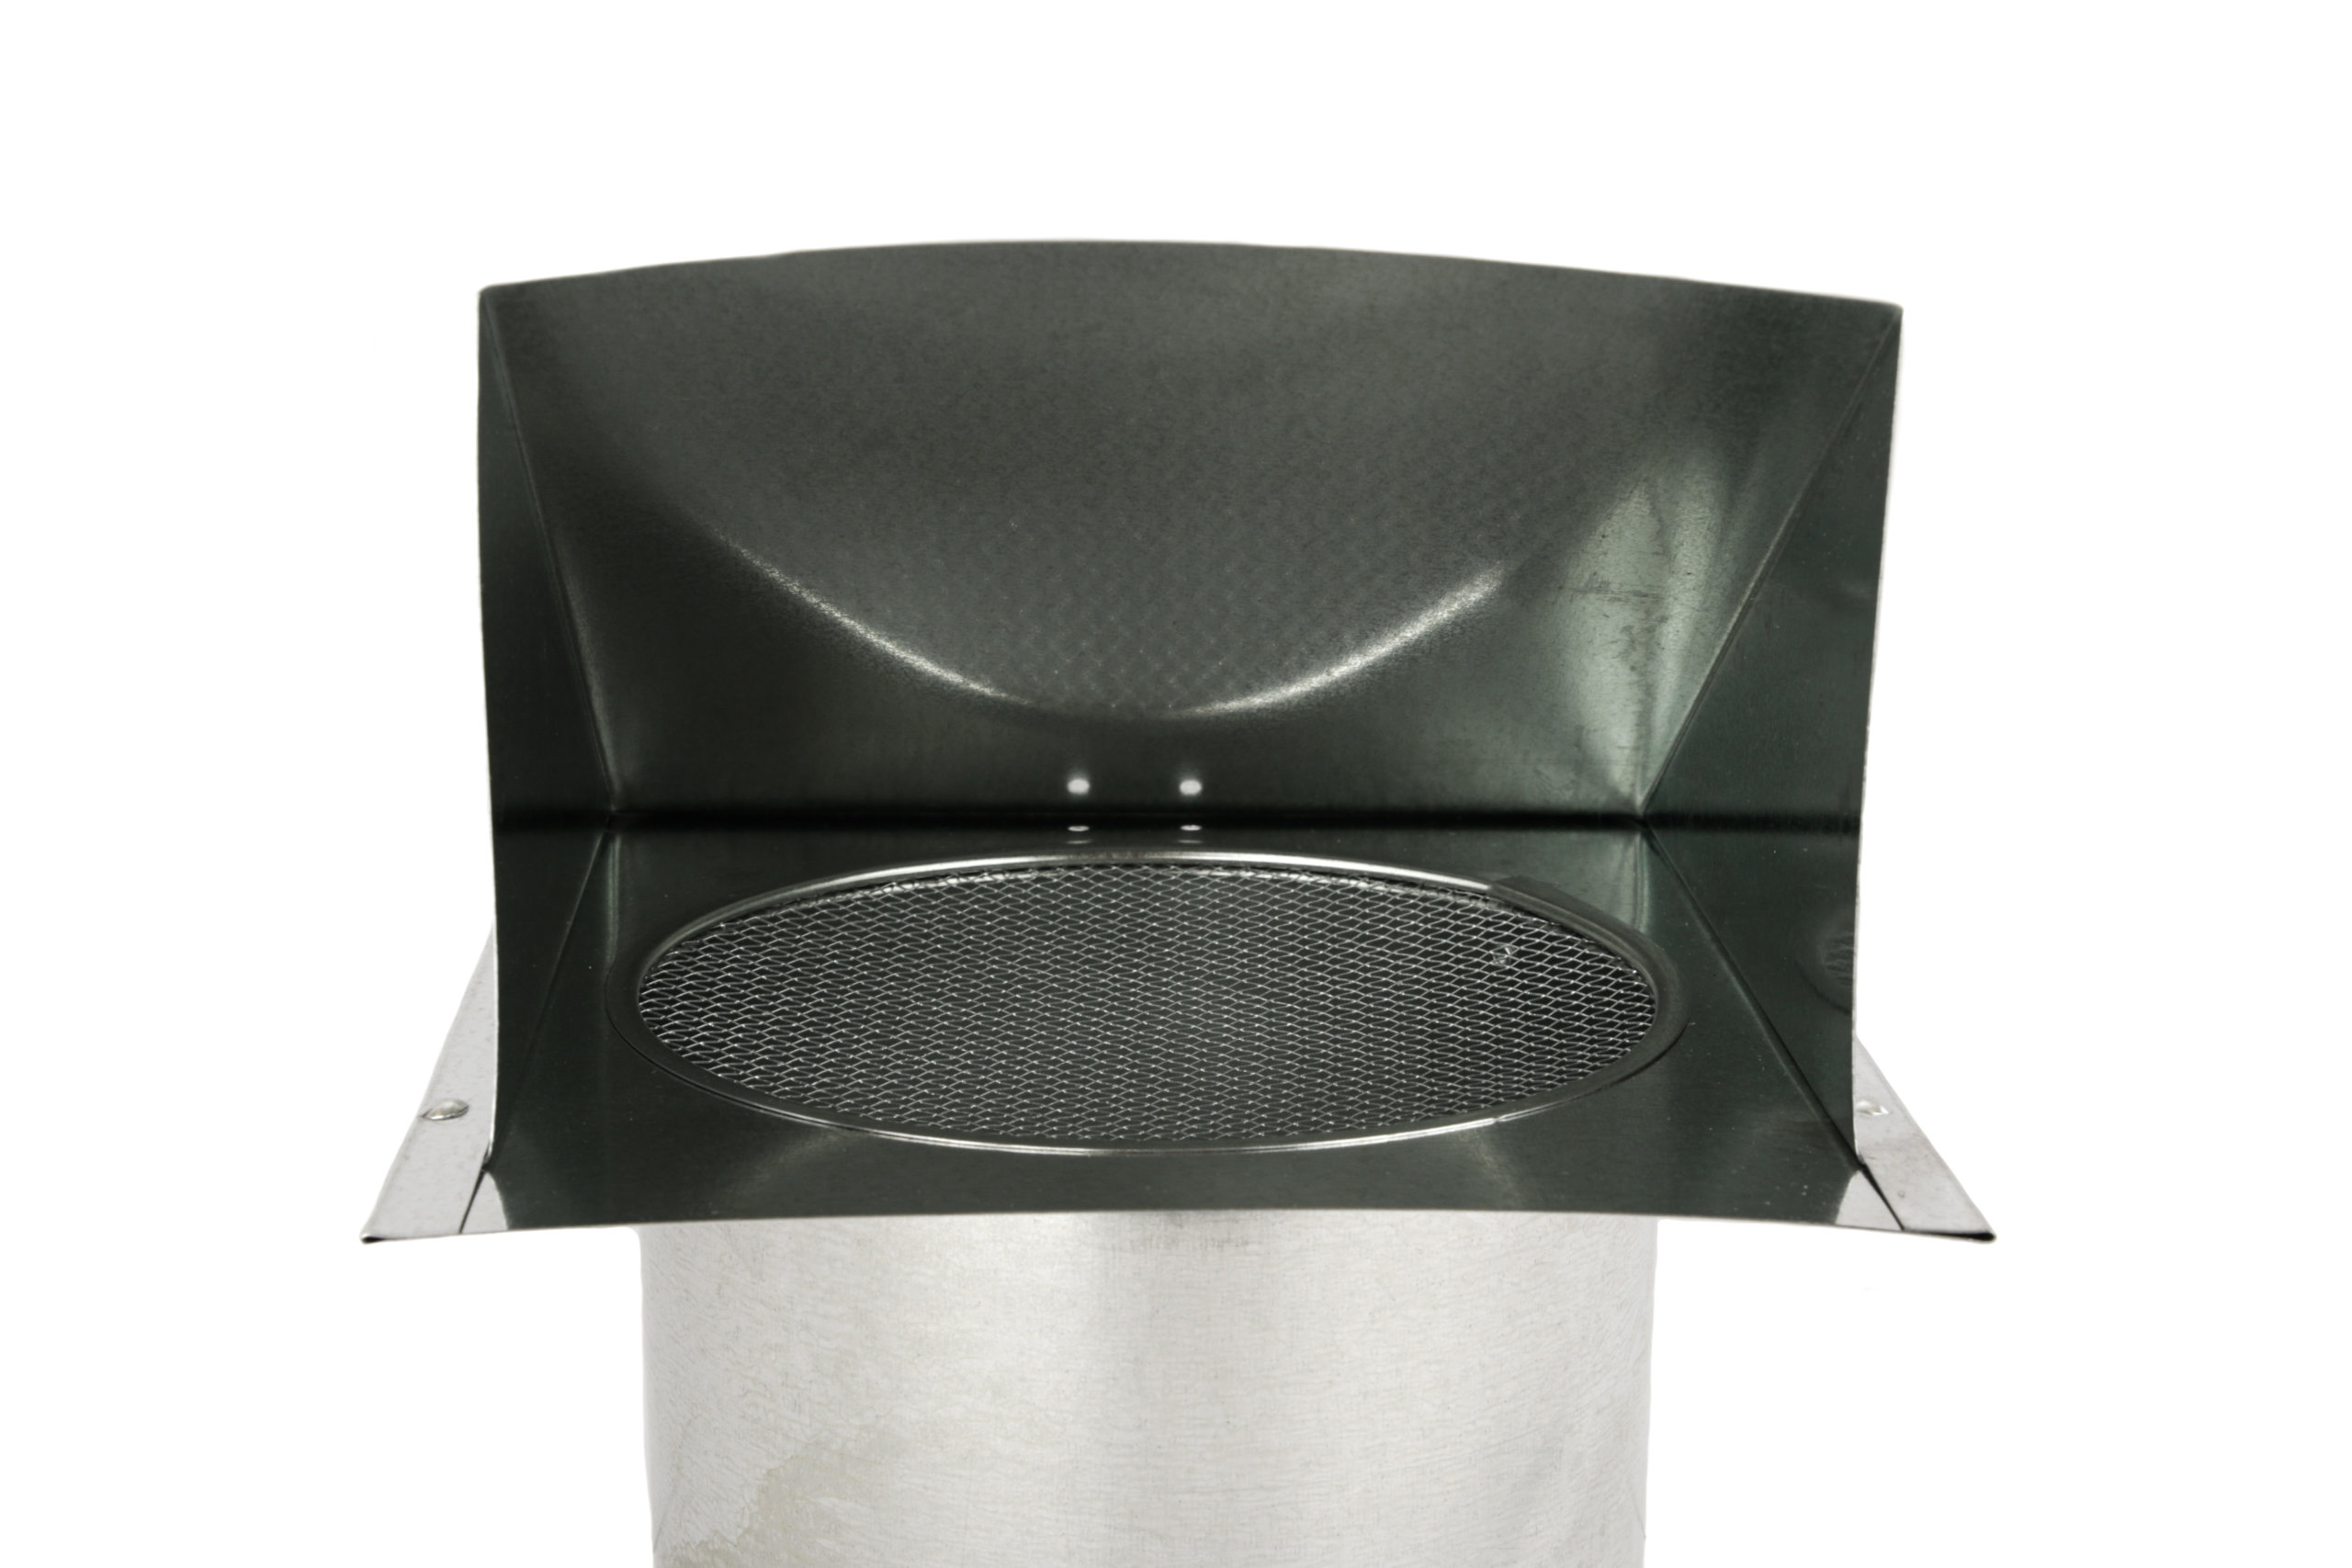 FAMCO Wall Vent - Reversible Backdraft Damper - Galvanized Steel (Front View)